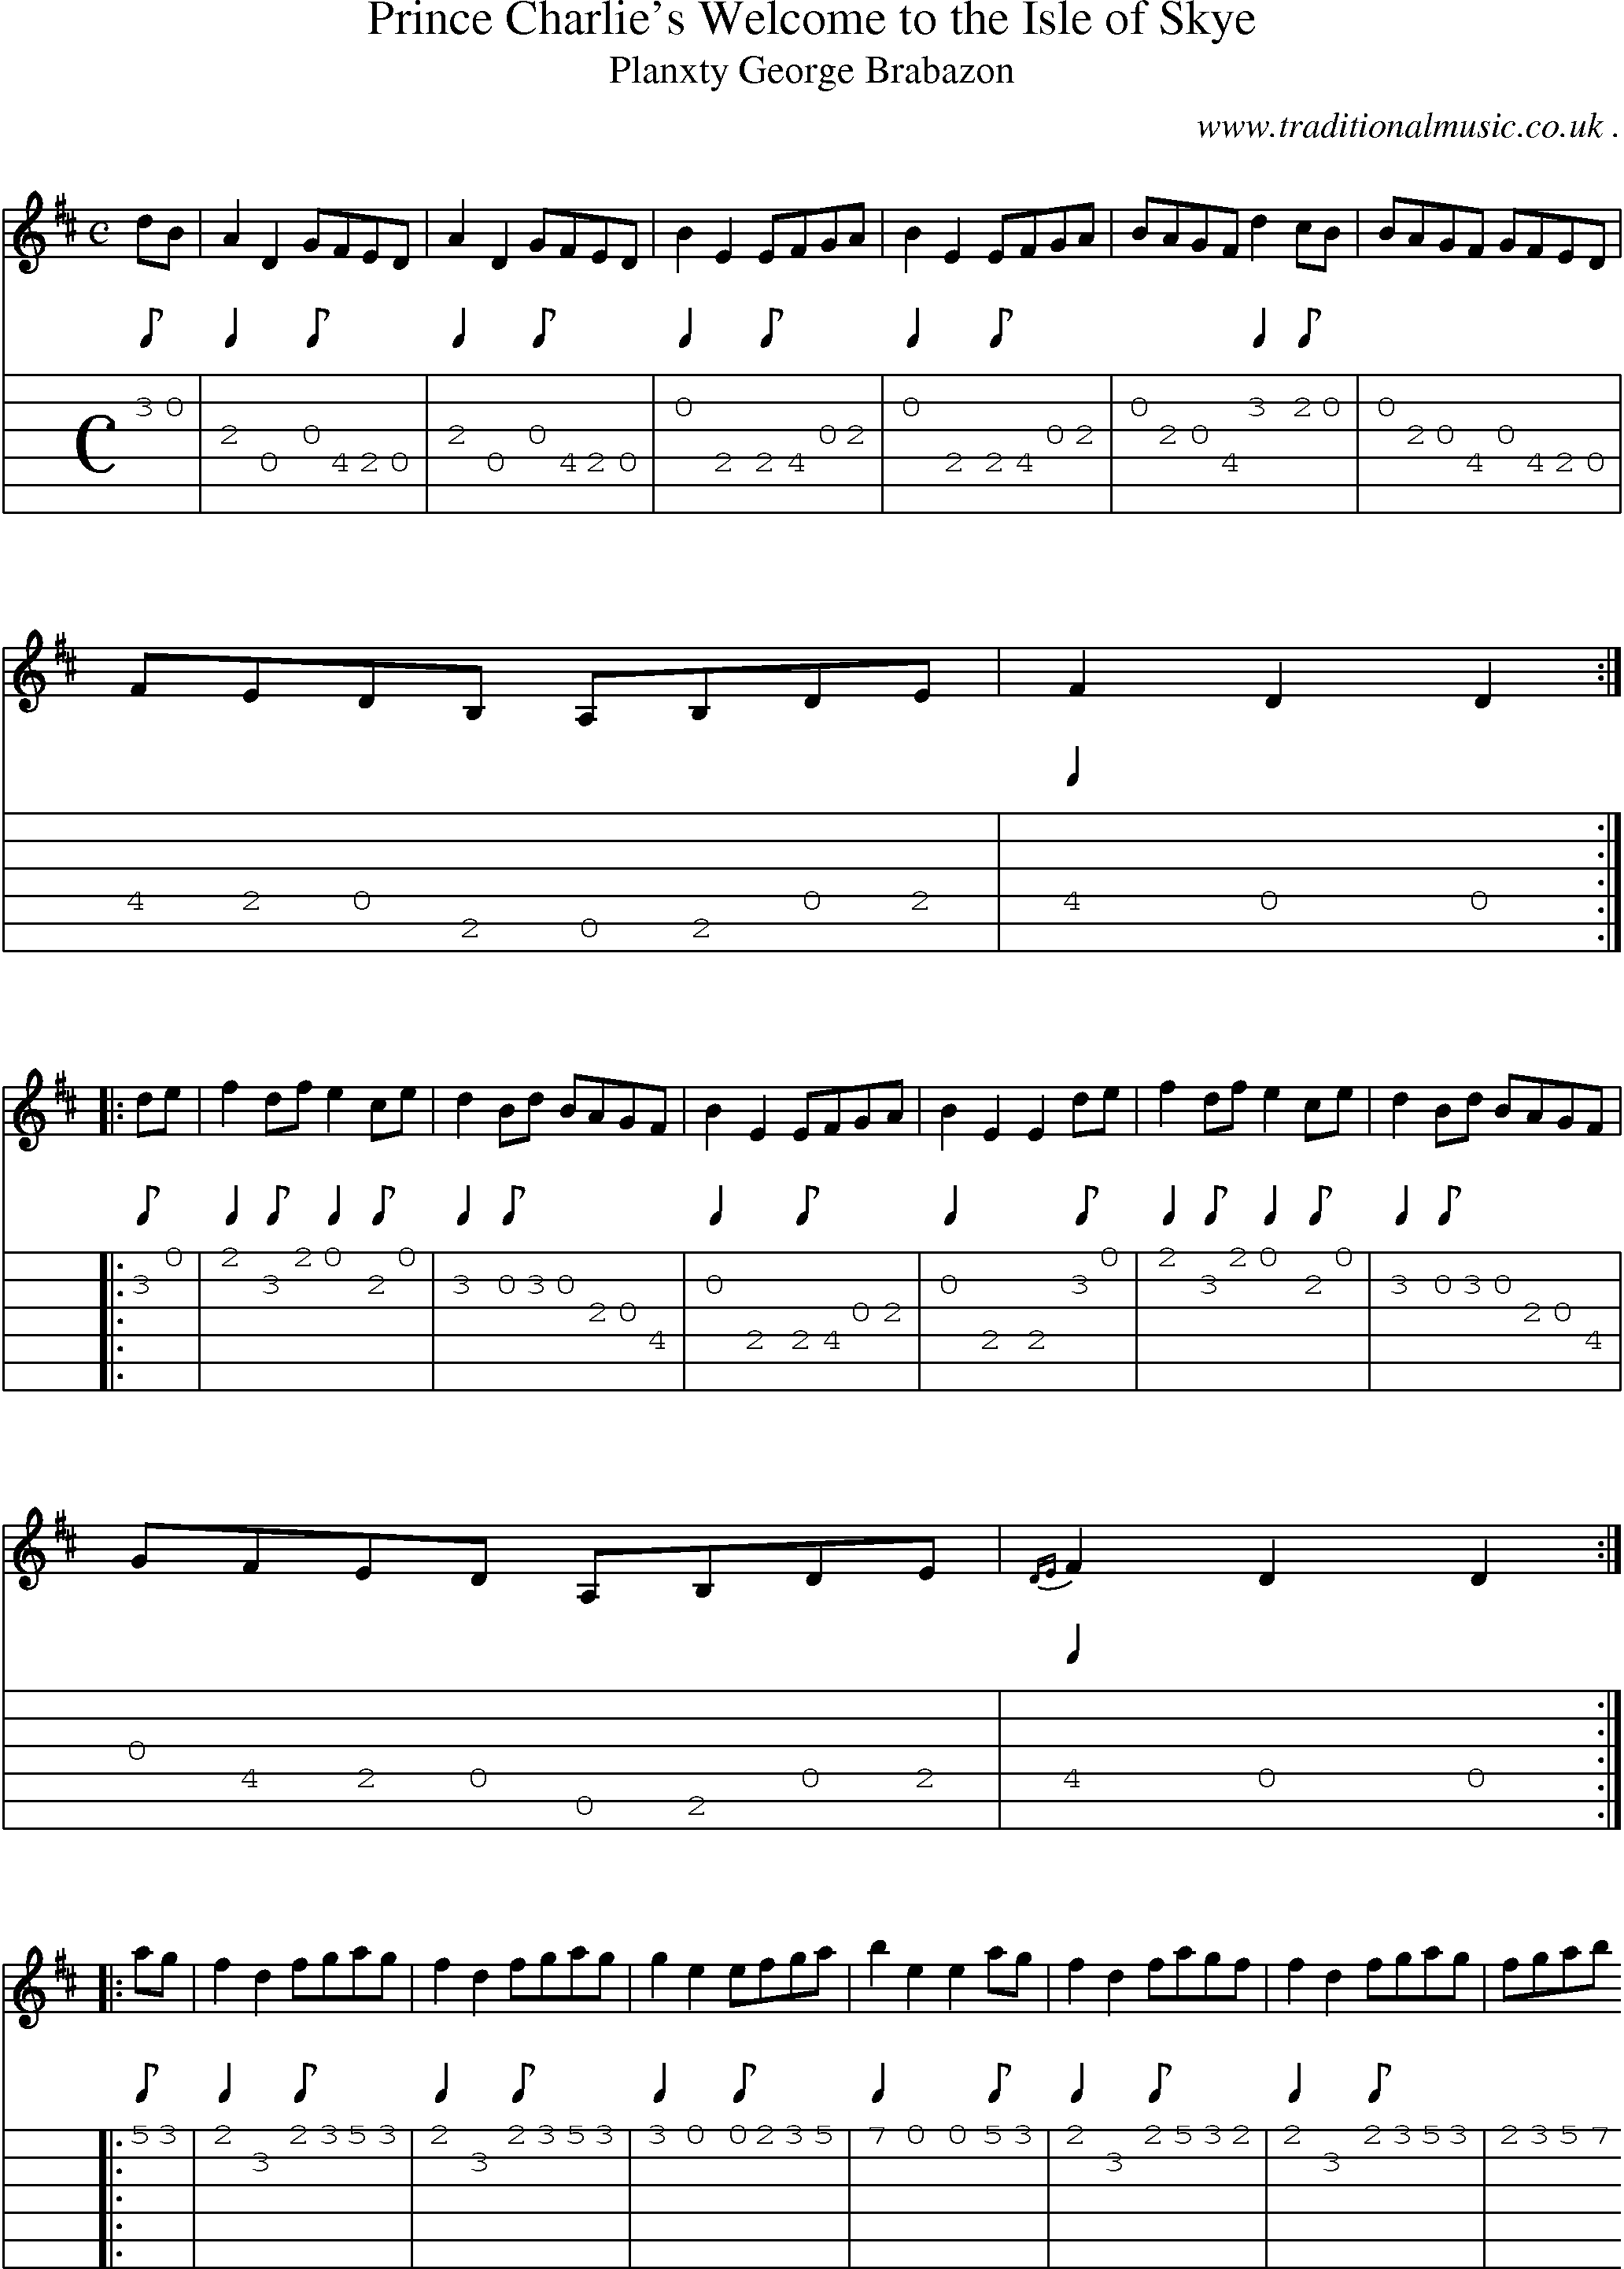 Sheet-music  score, Chords and Guitar Tabs for Prince Charlies Welcome To The Isle Of Skye